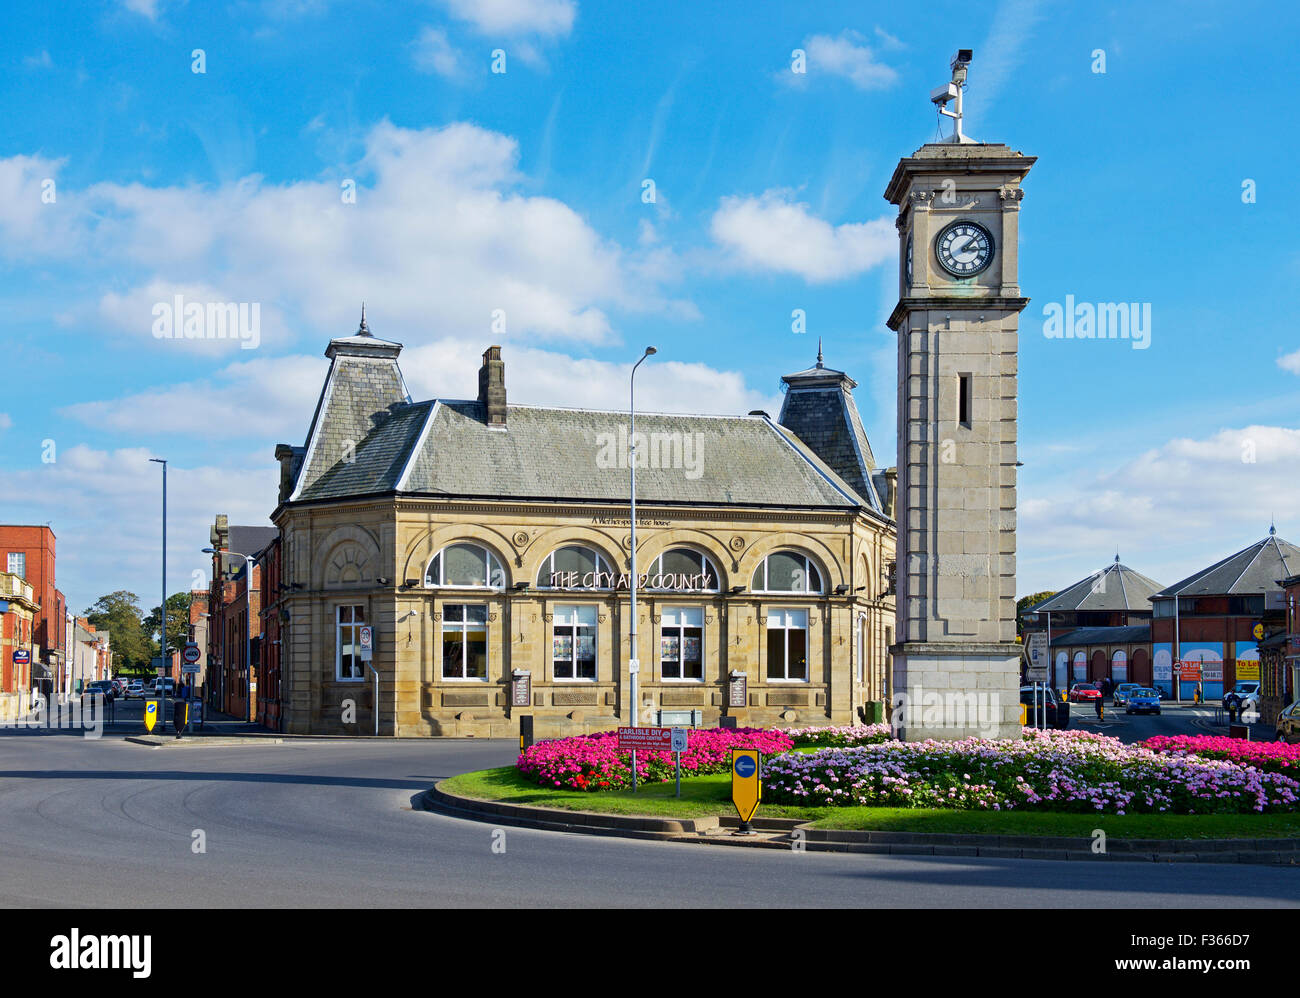 Wetherspoon's pub - City and Country - in Goole, East Riding of Yorkshire, England UK Stock Photo